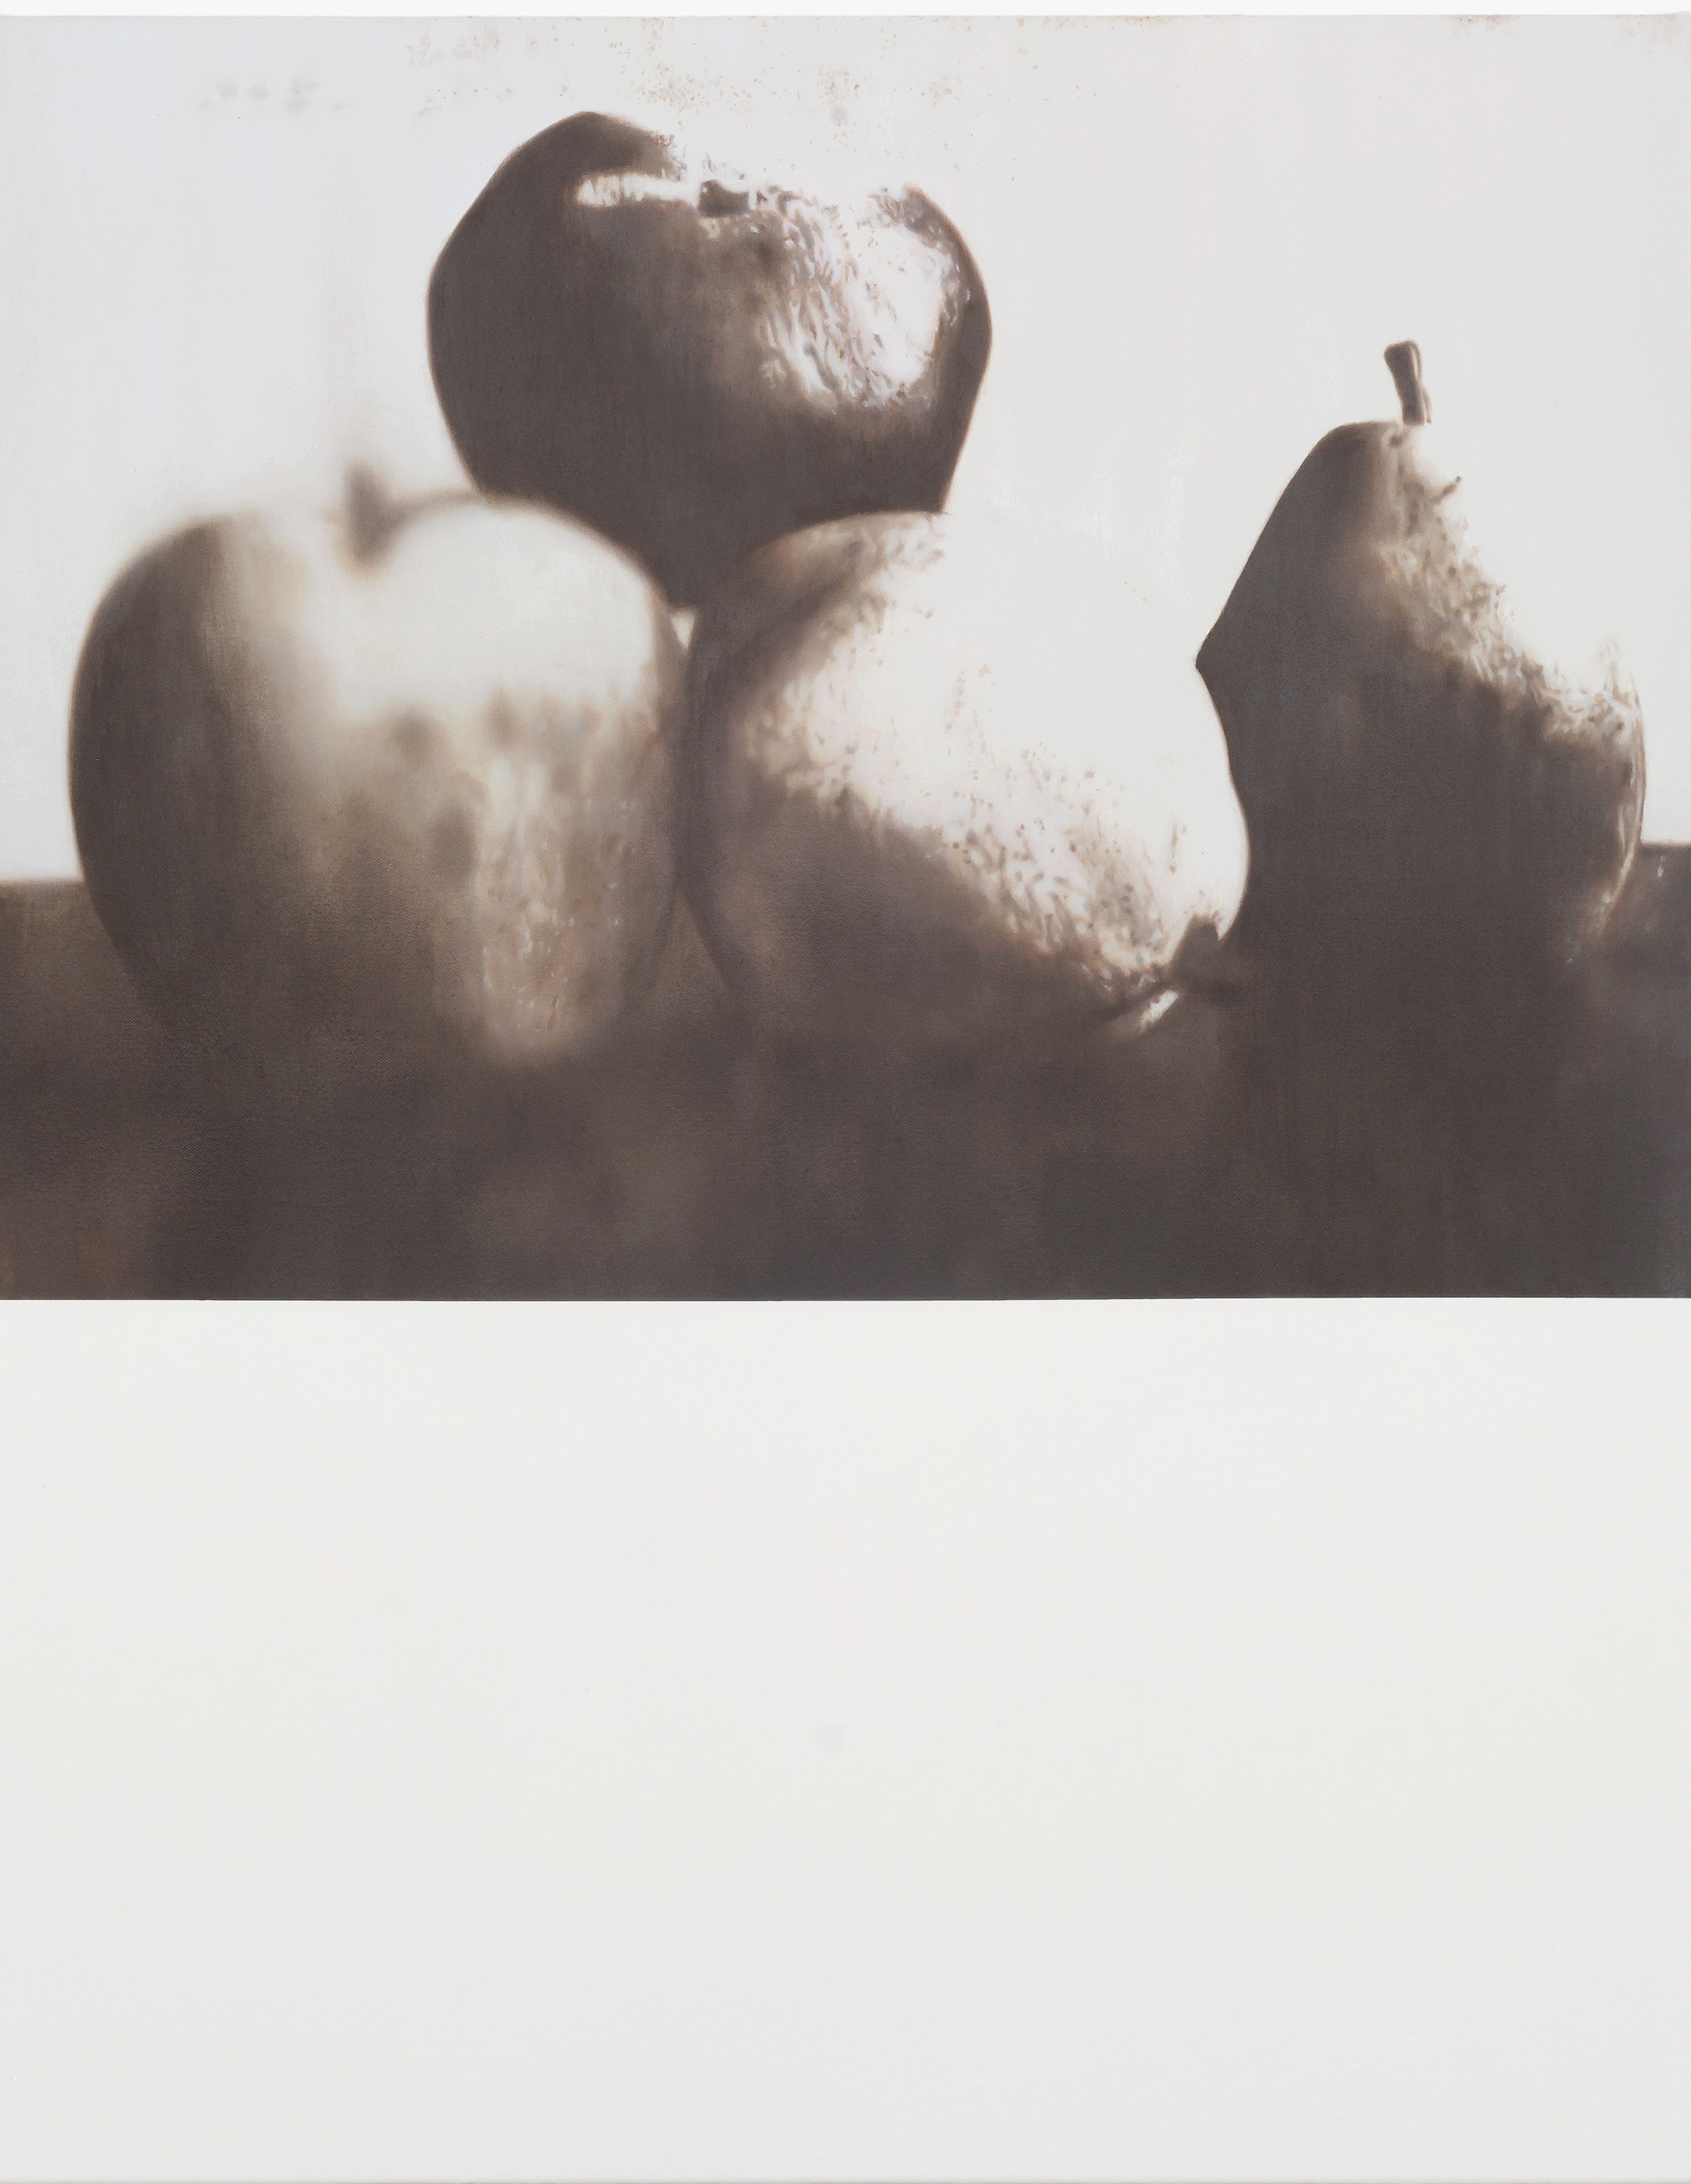 Realf Heygate, Render (apples, pears and pomegranate), The Auction Collective